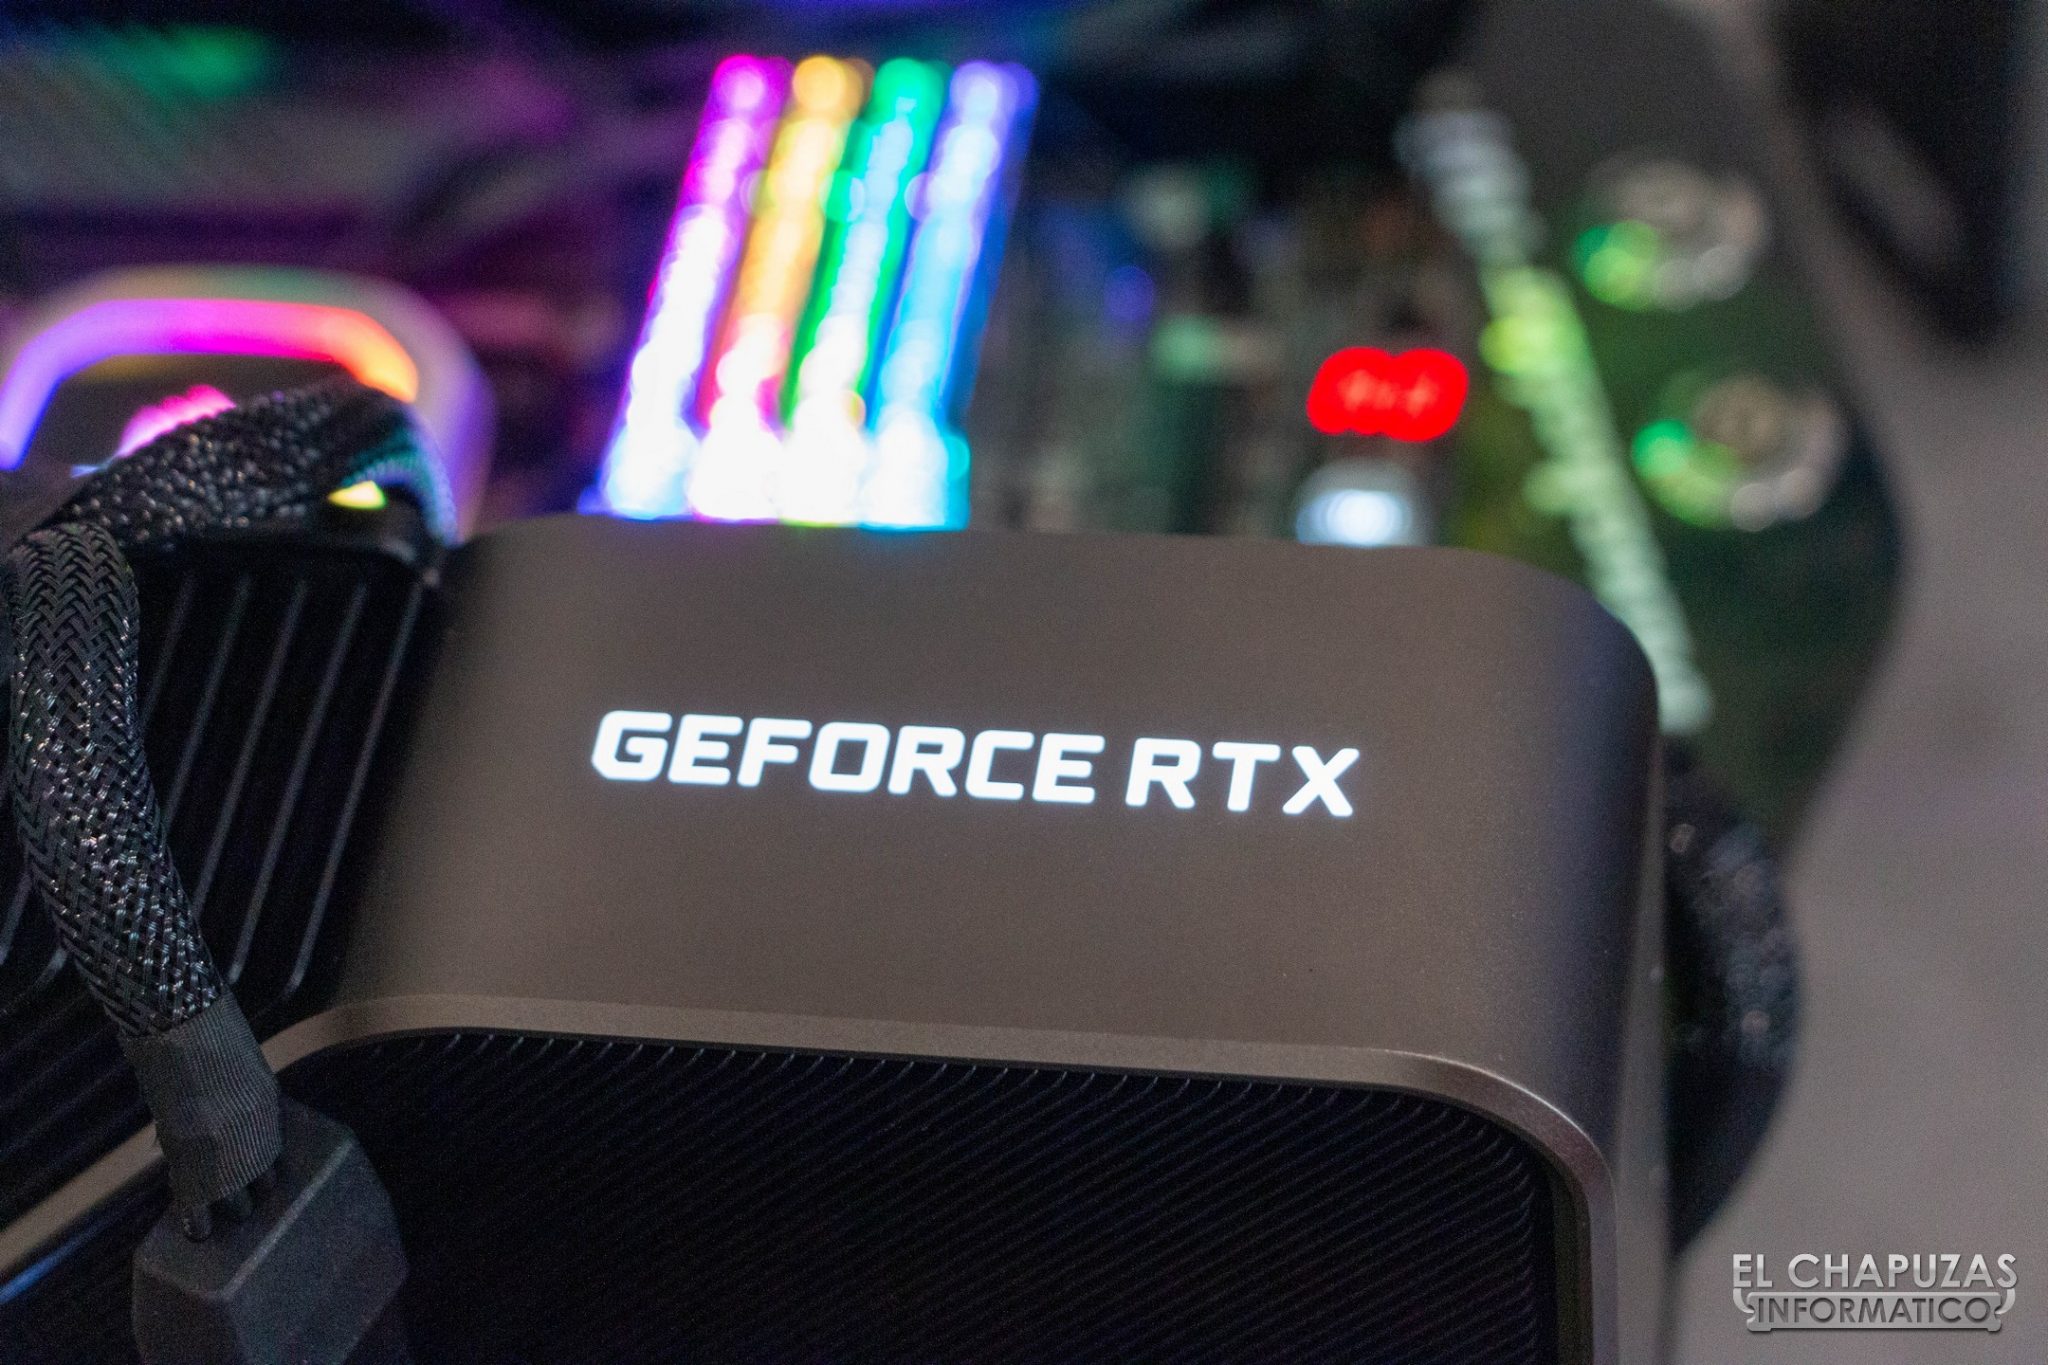 Man Makes History By Purchasing 18 Euro RTX 4090!